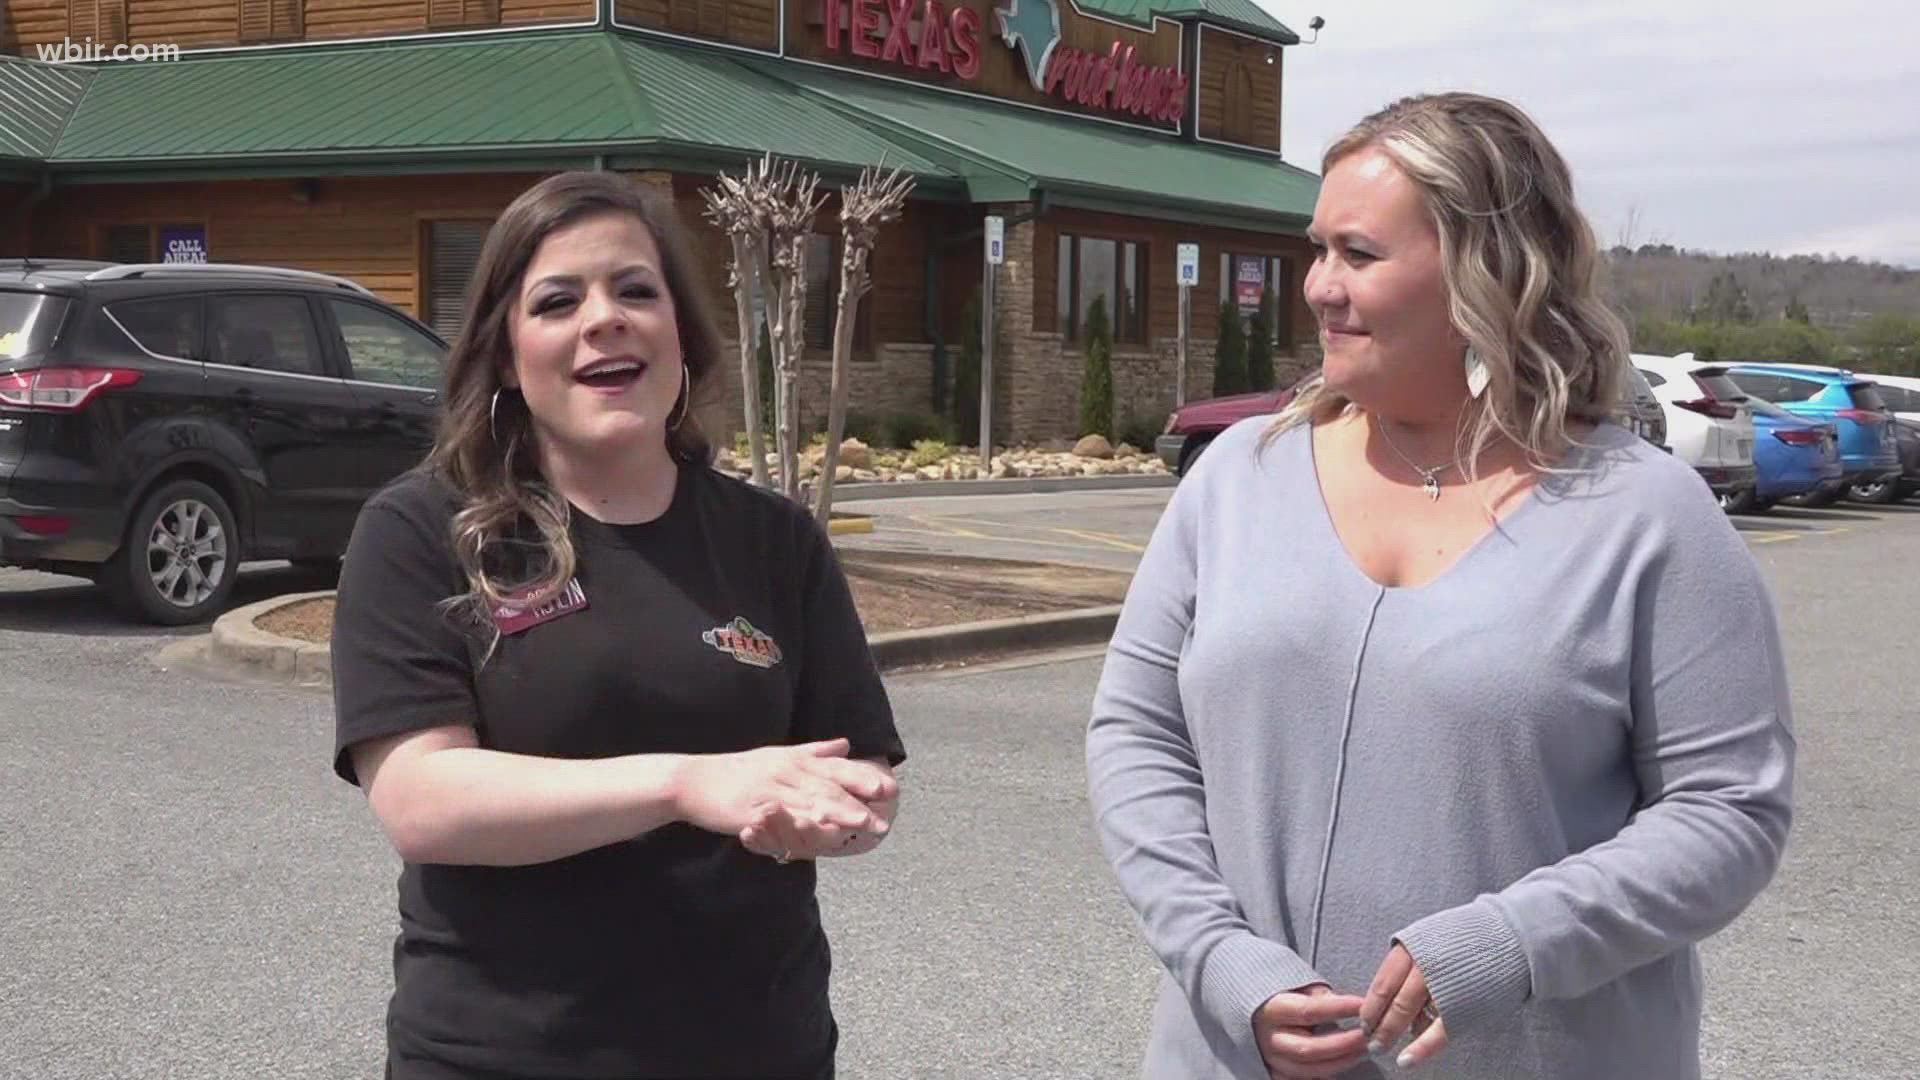 A family eating at Texas Roadhouse in Turkey Creek discovered their server was deaf, but that didn't stop them from enjoying their time.